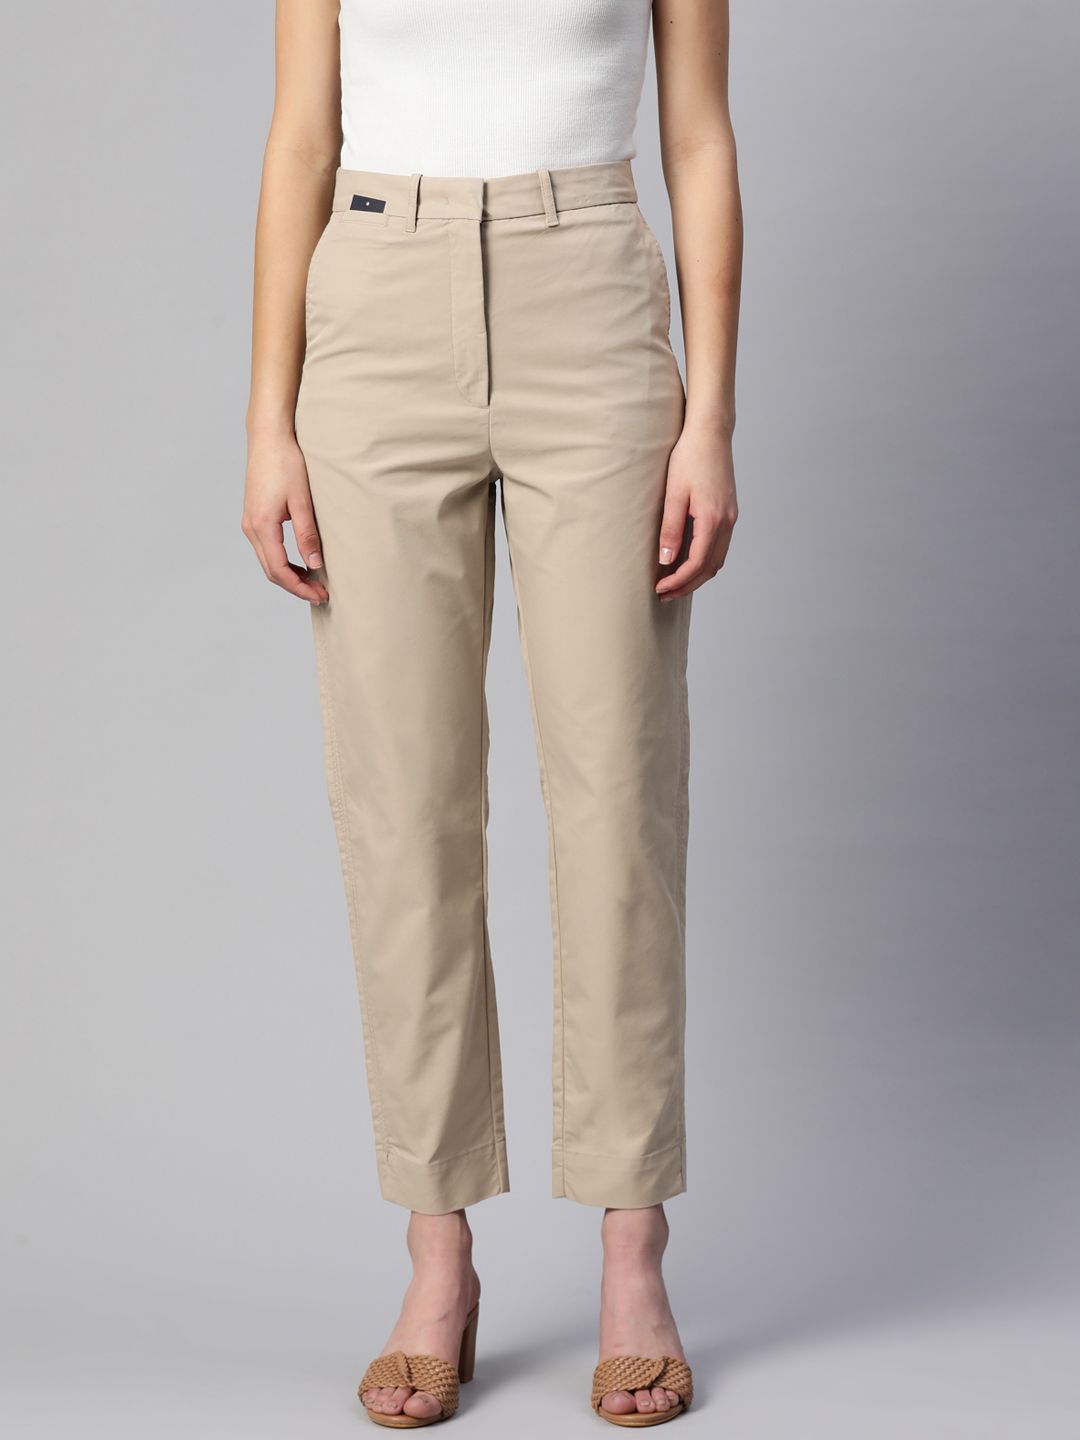 Marks & Spencer Women Tapered Fit Chinos Trousers Price in India